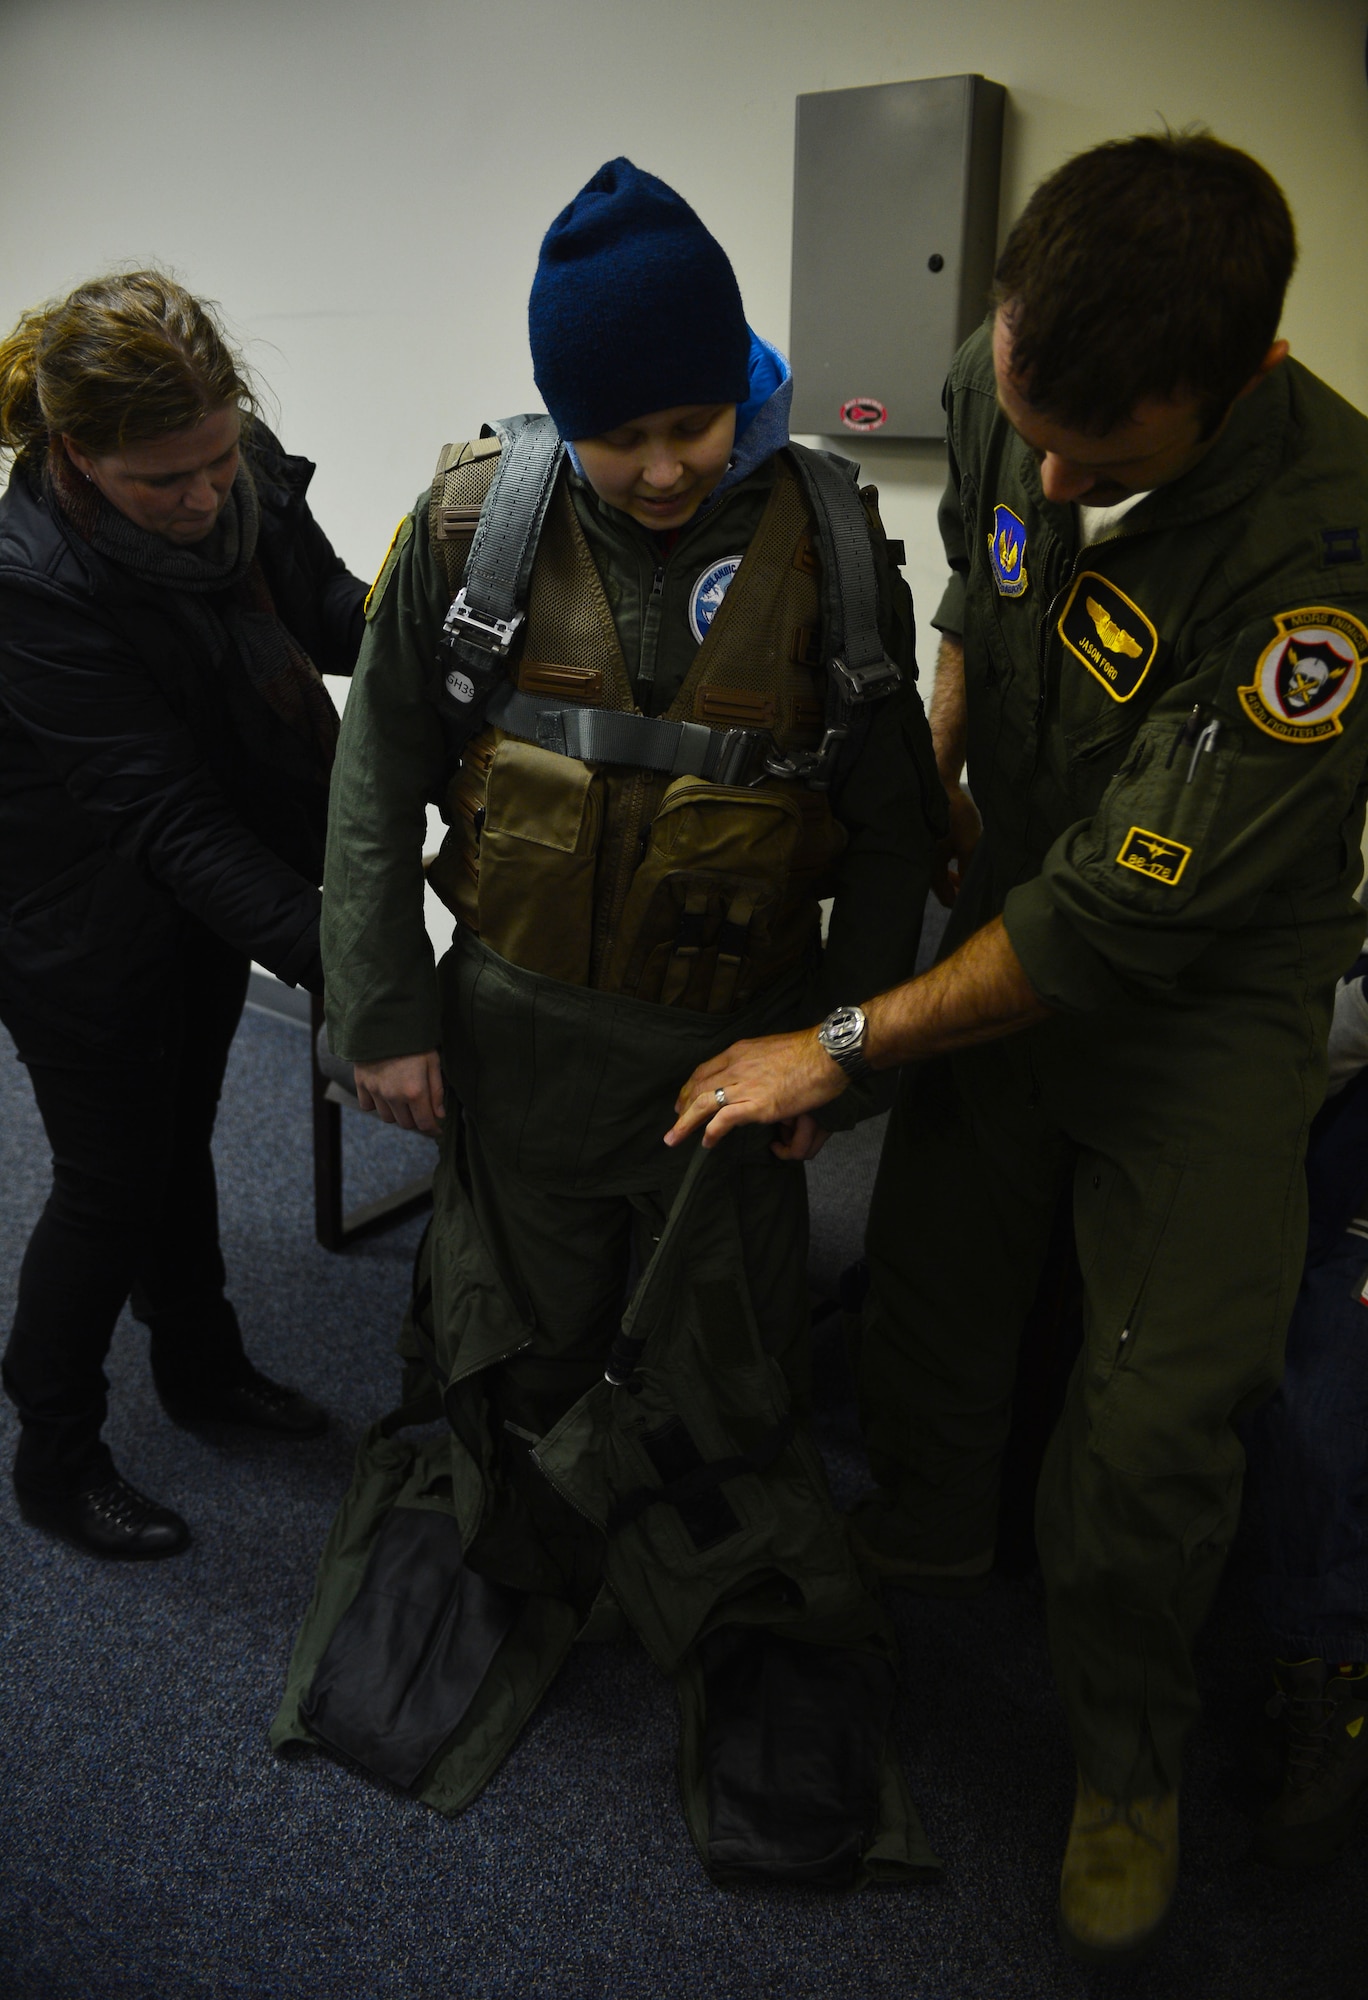 U.S. Air Force Capt. Jason Ford, 871st Air Expeditionary Squadron F-15C Eagle fighter aircraft pilot, and Aðalheiður Þorsteinsdóttir, Gunnar Guðlaugsson's mother, help Guðlaugsson don flight equipment during the Pilot for a Day program at Keflavik International Airport, Iceland, May 13, 2015. The 871st AES hosted two children as part of the program,who were fitted with aircrew flight equipment and introduced to what a day in the life of a U.S. Air Force pilot is like. (U.S. Air Force photo by 2nd Lt. Meredith Mulvihill/Released)